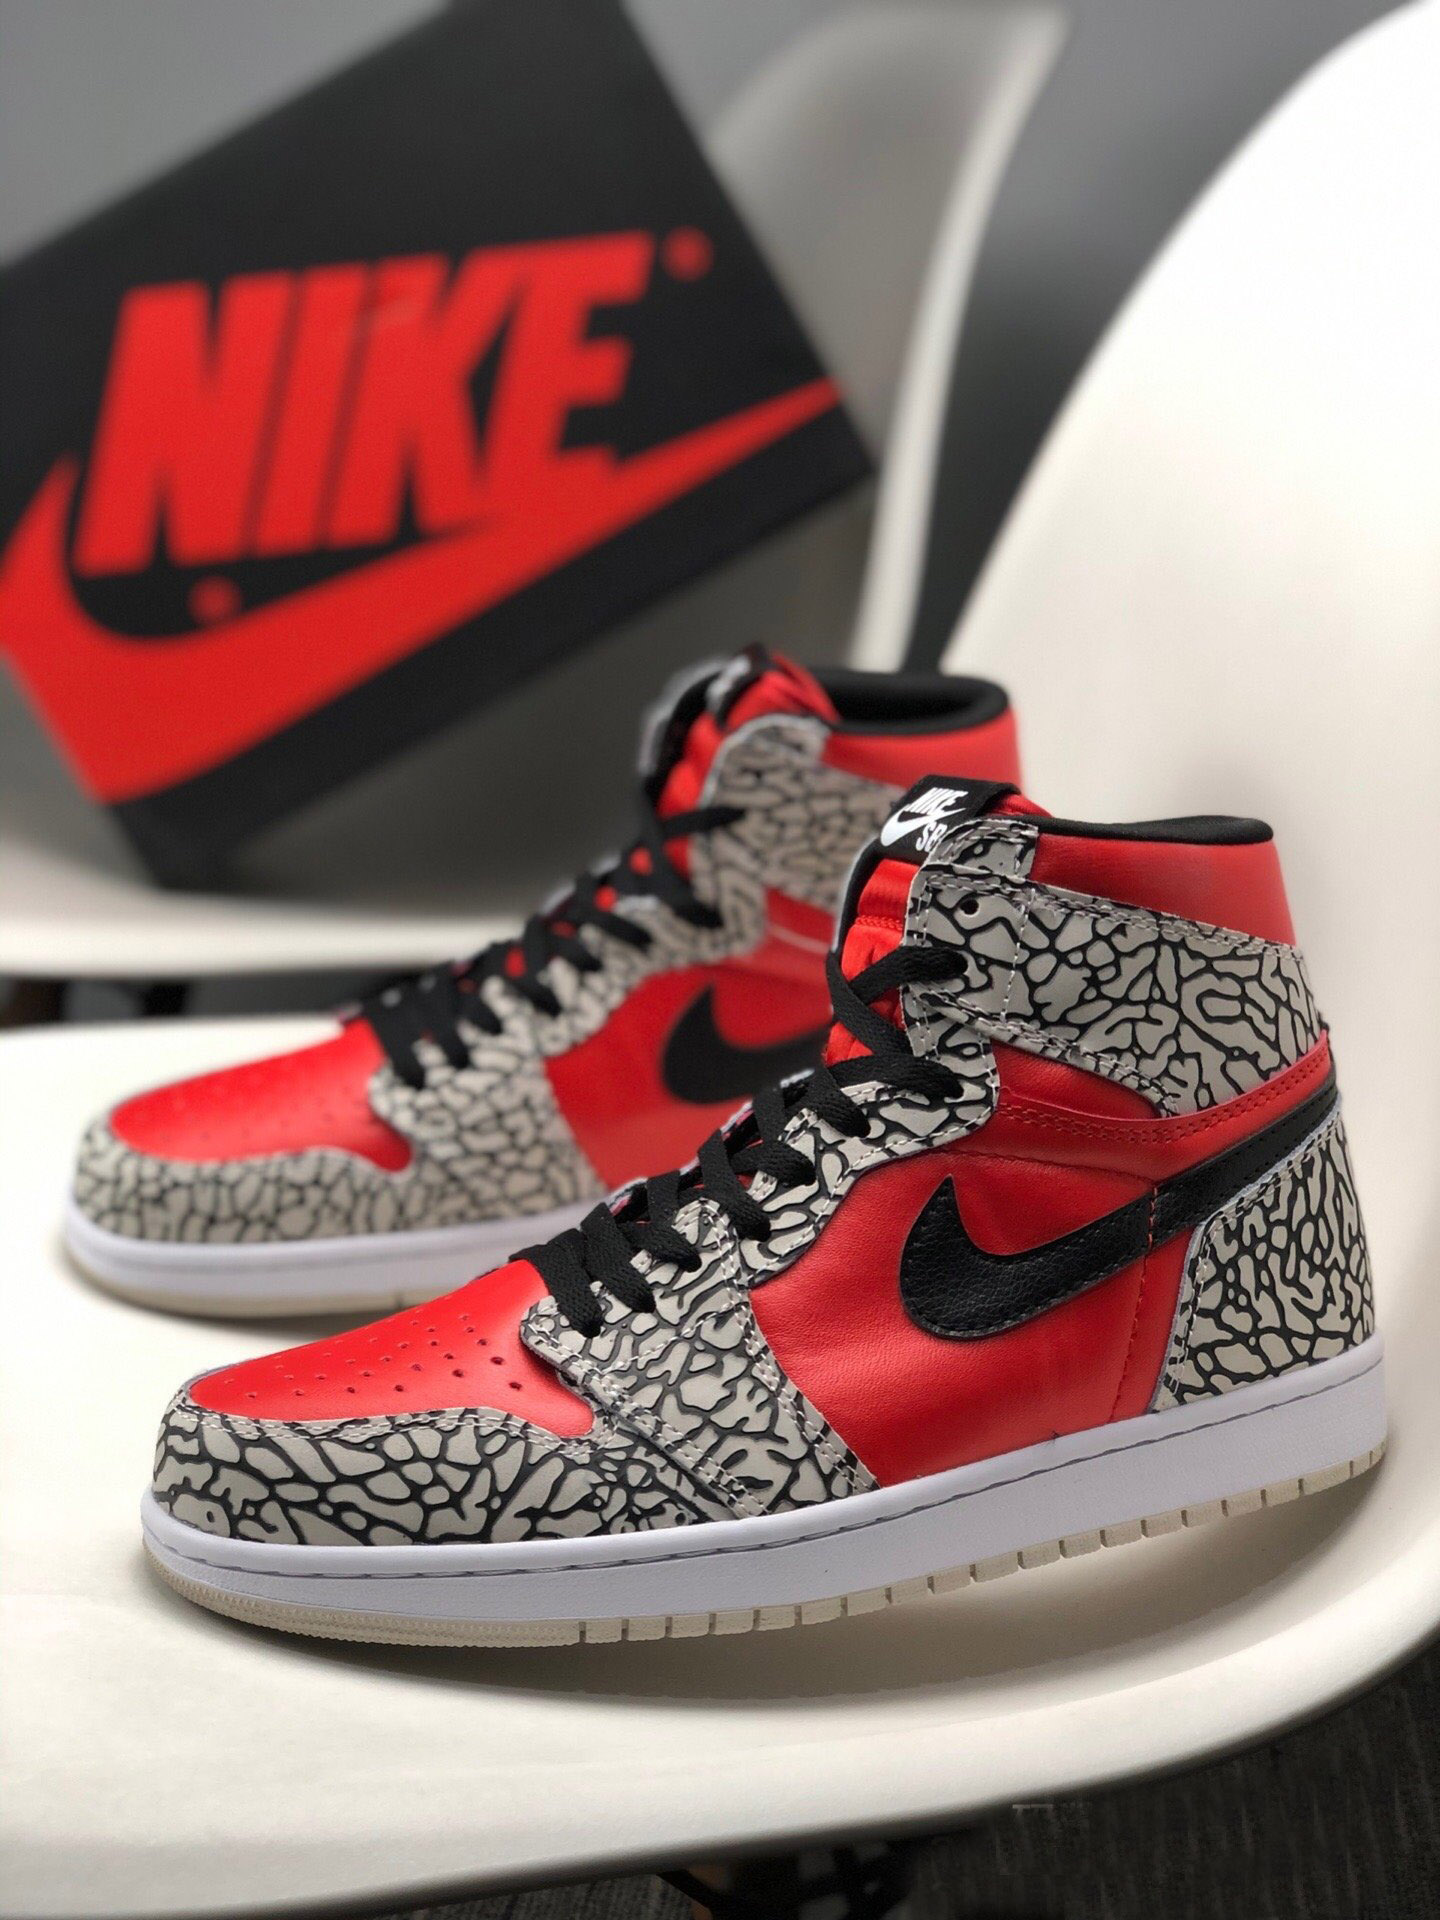 BespokeIND Nike Air Jordan 1 “Red Cement”: Official Images